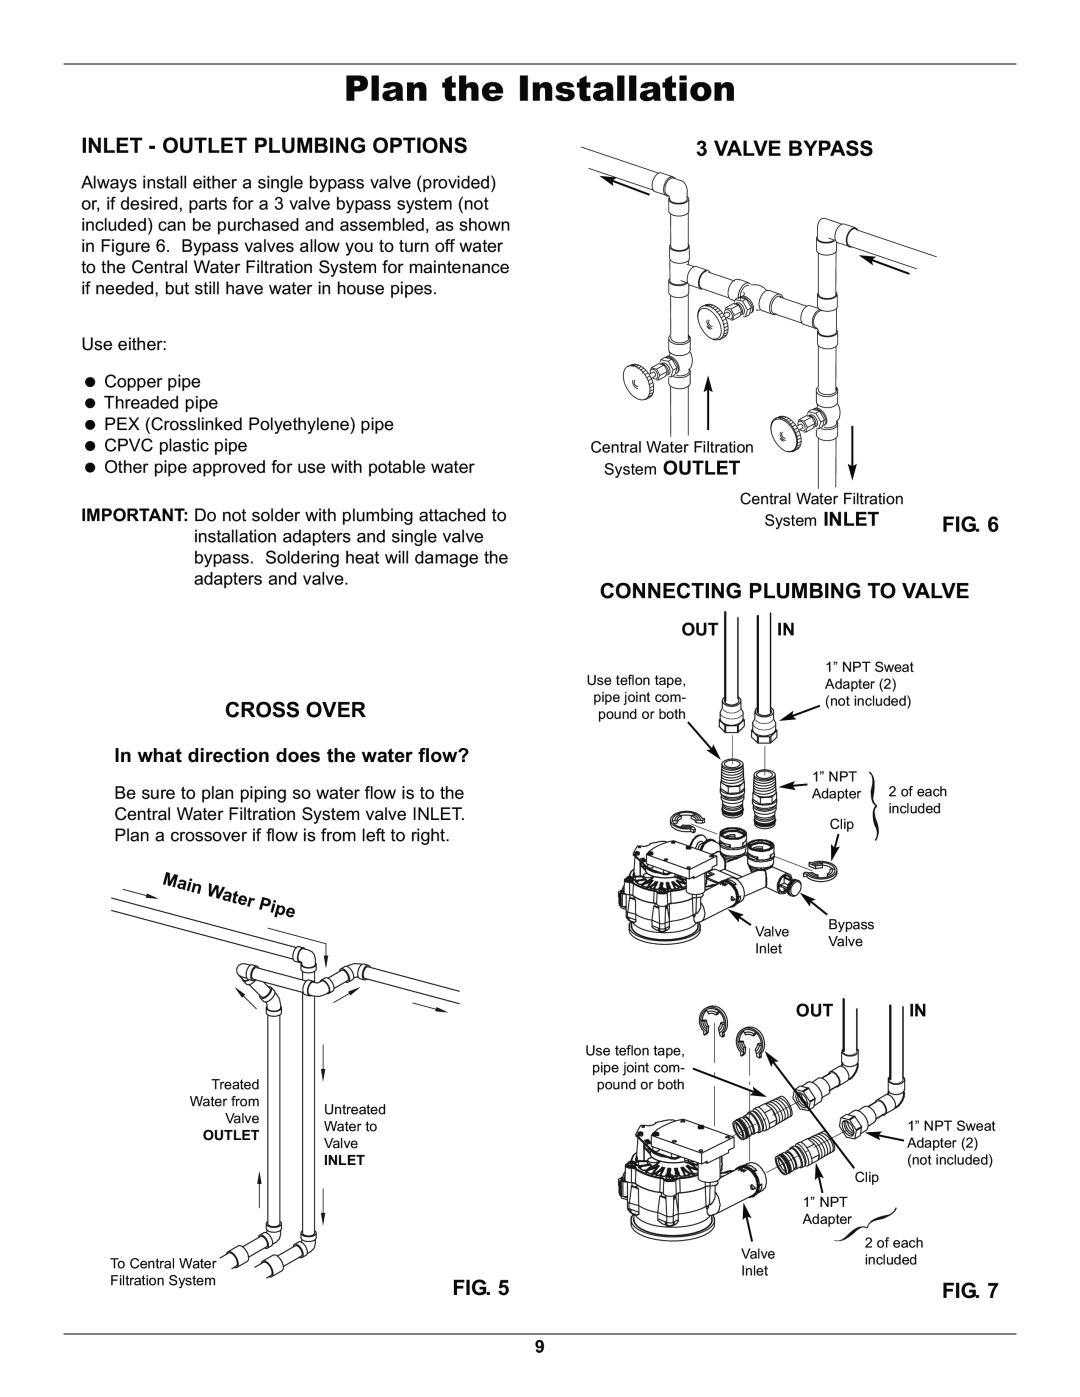 Whirlpool WHELJ1 manual Plan the Installation, Inlet - Outlet Plumbing Options, Valve Bypass, Connecting Plumbing To Valve 